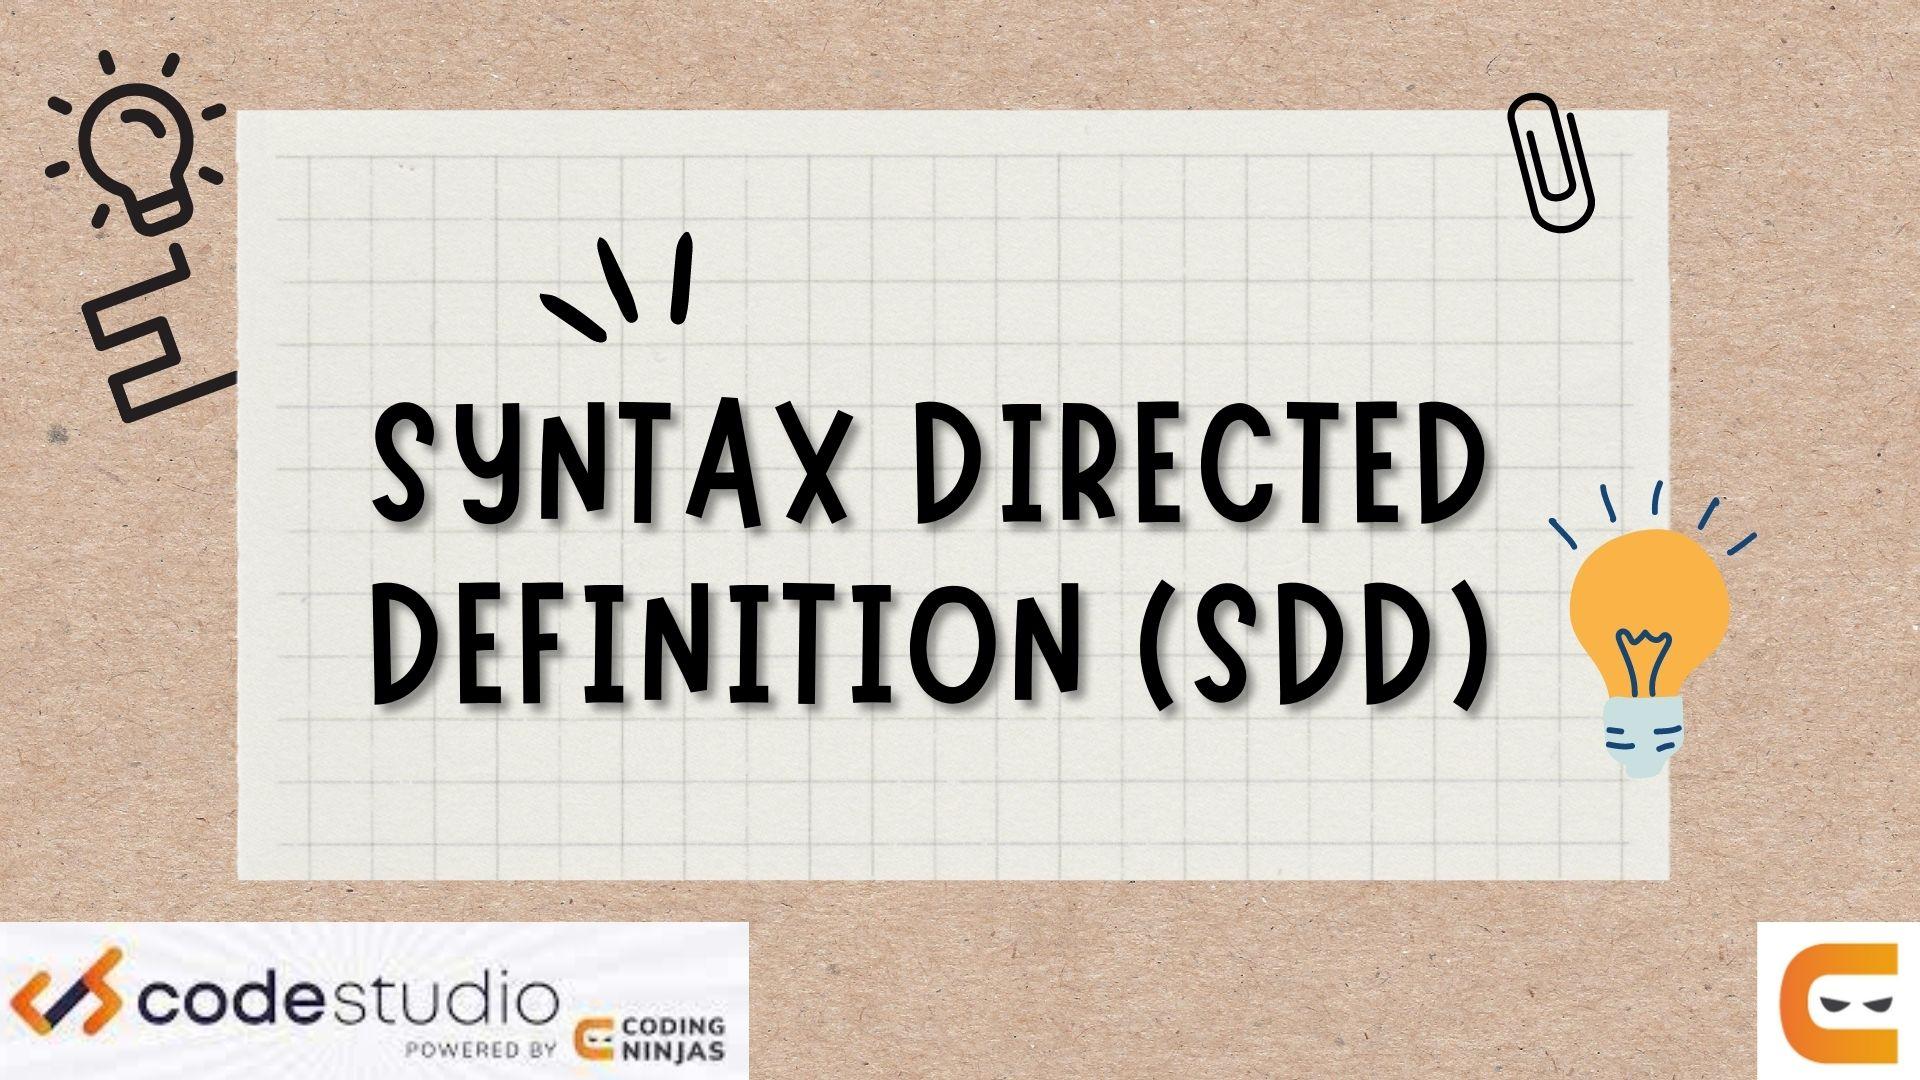 SDD: What is SDD and what is its function?